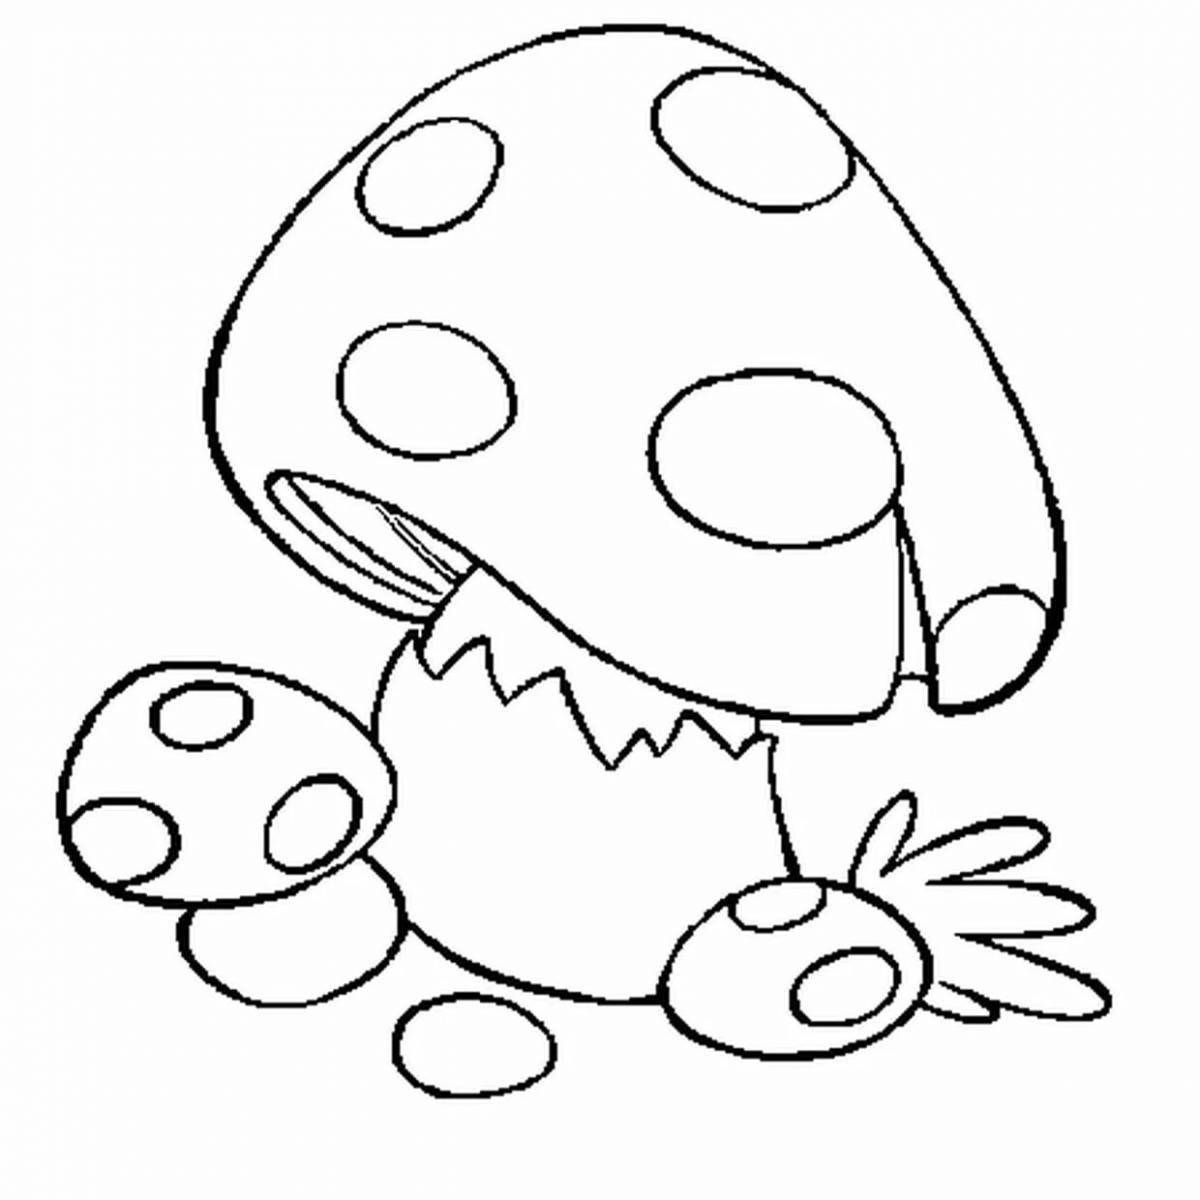 Awesome mushroom coloring pages for 3-4 year olds